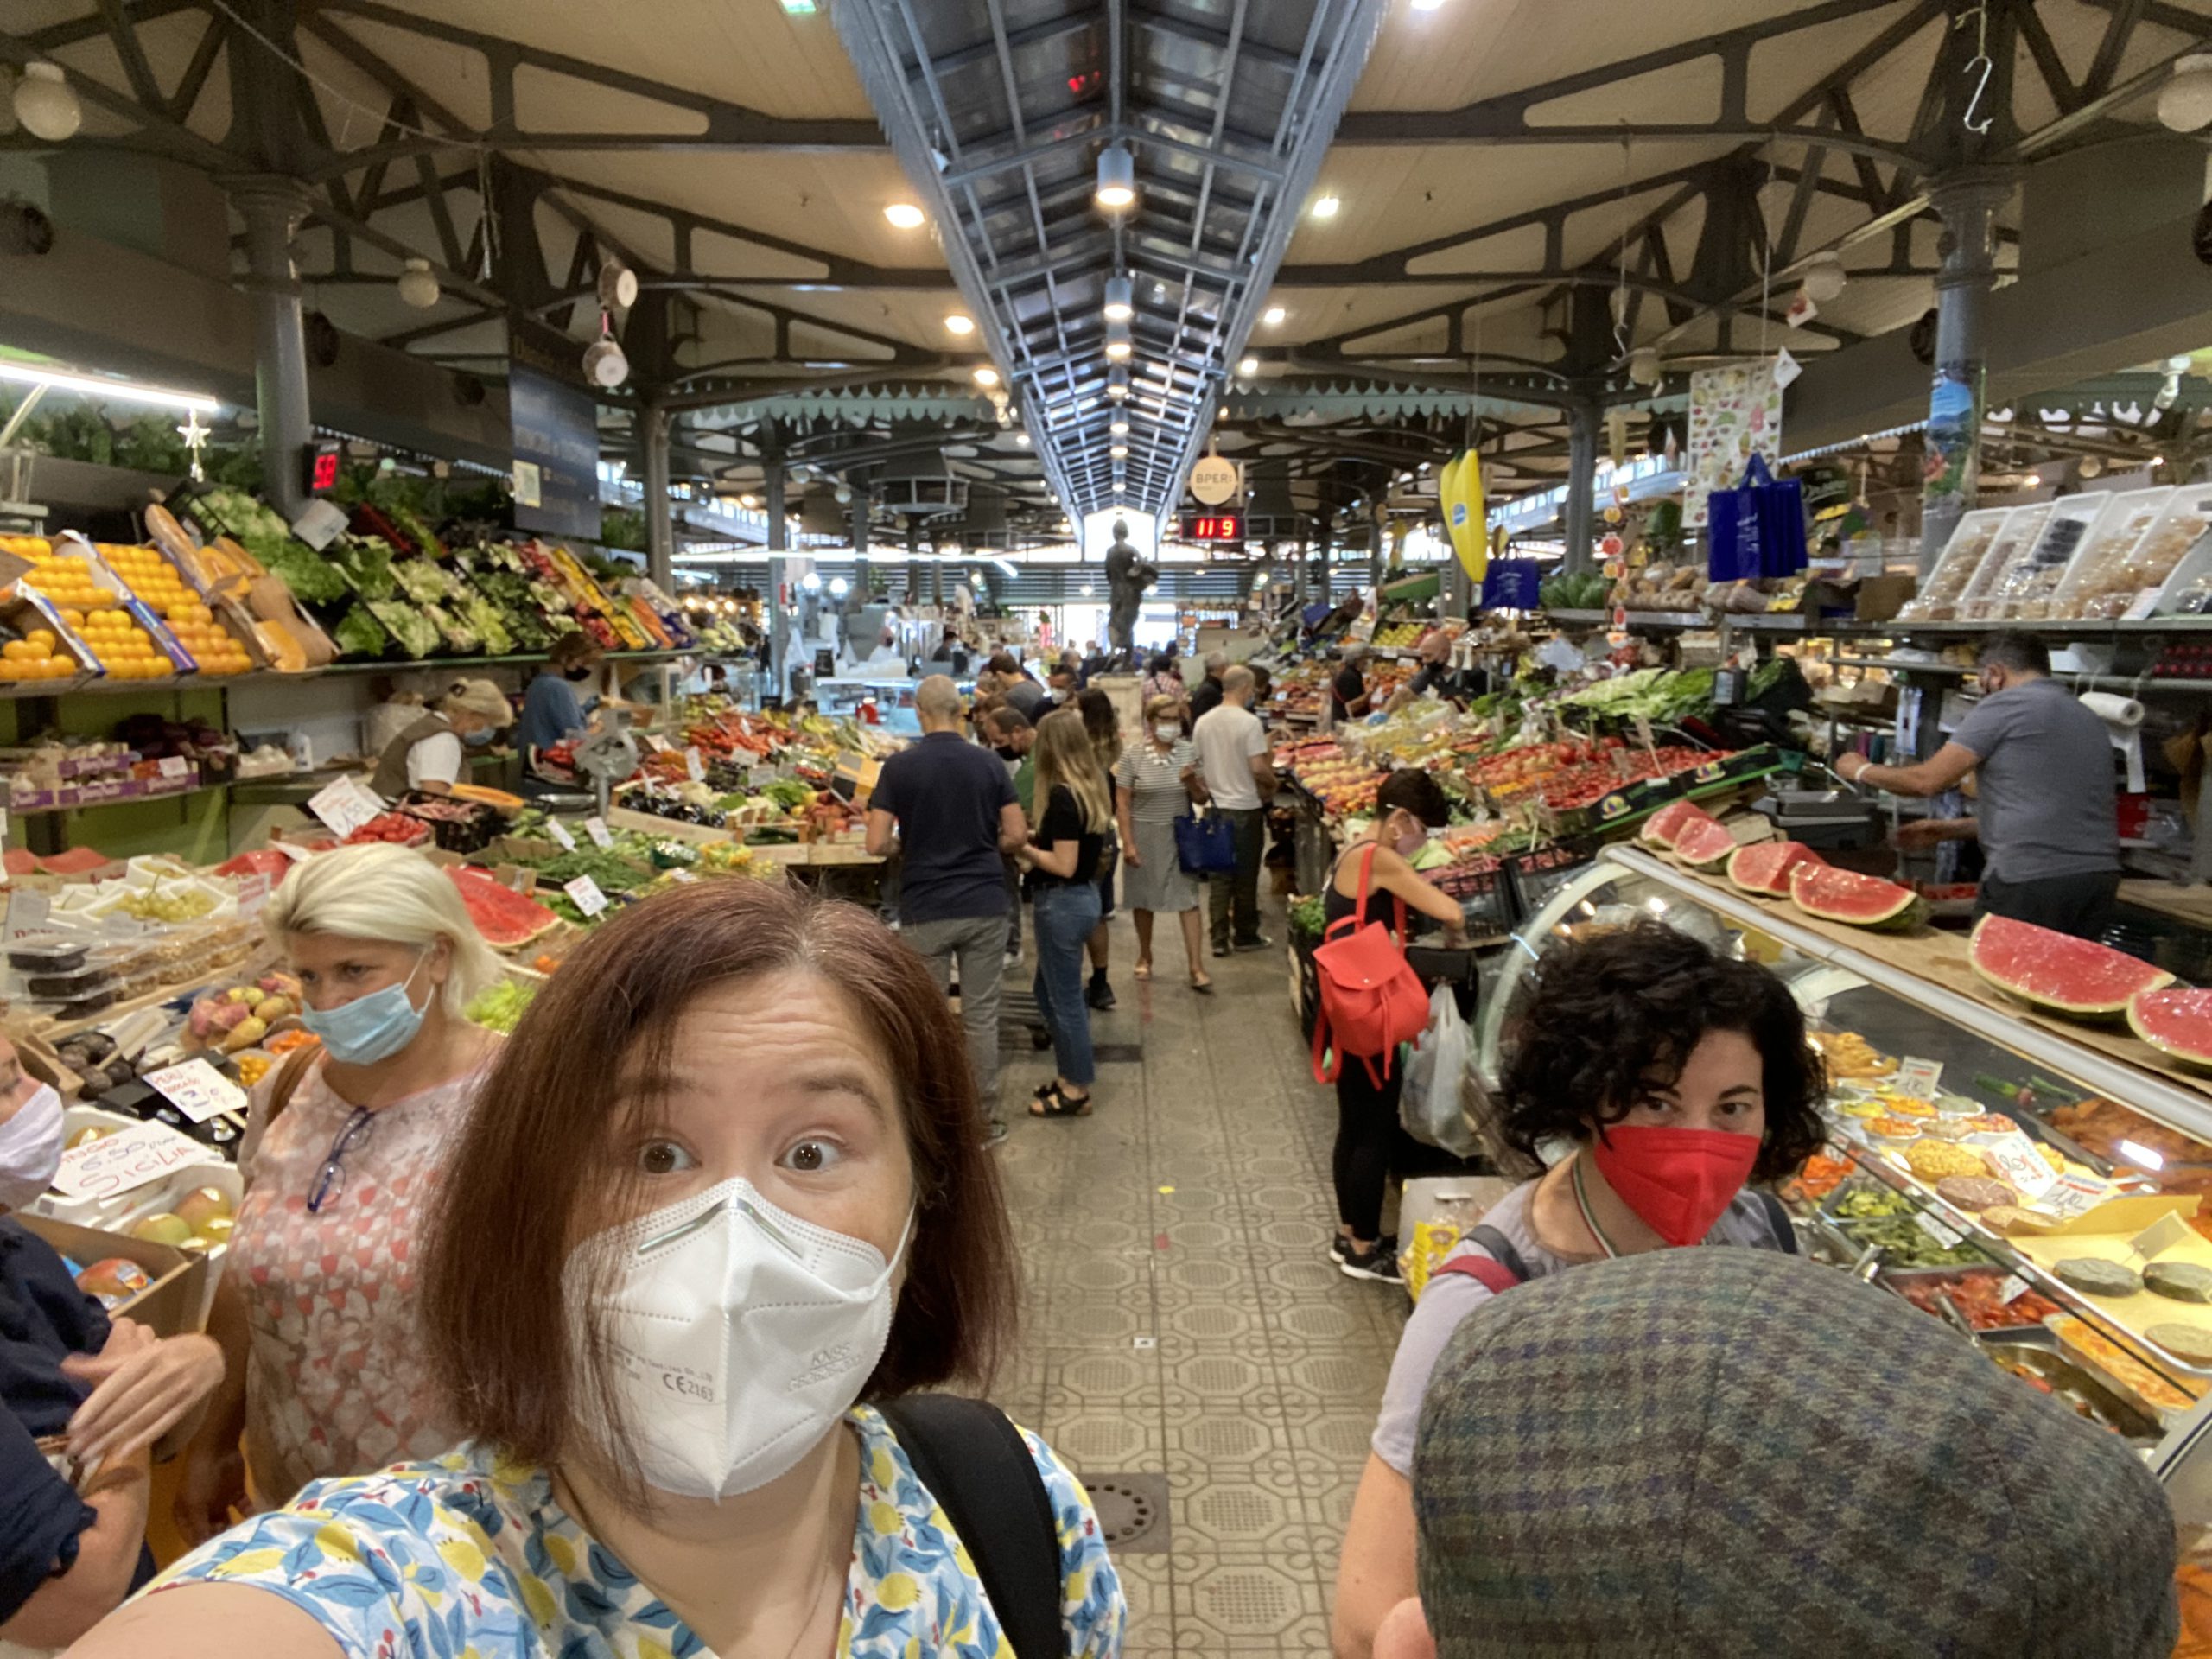 Me in the market